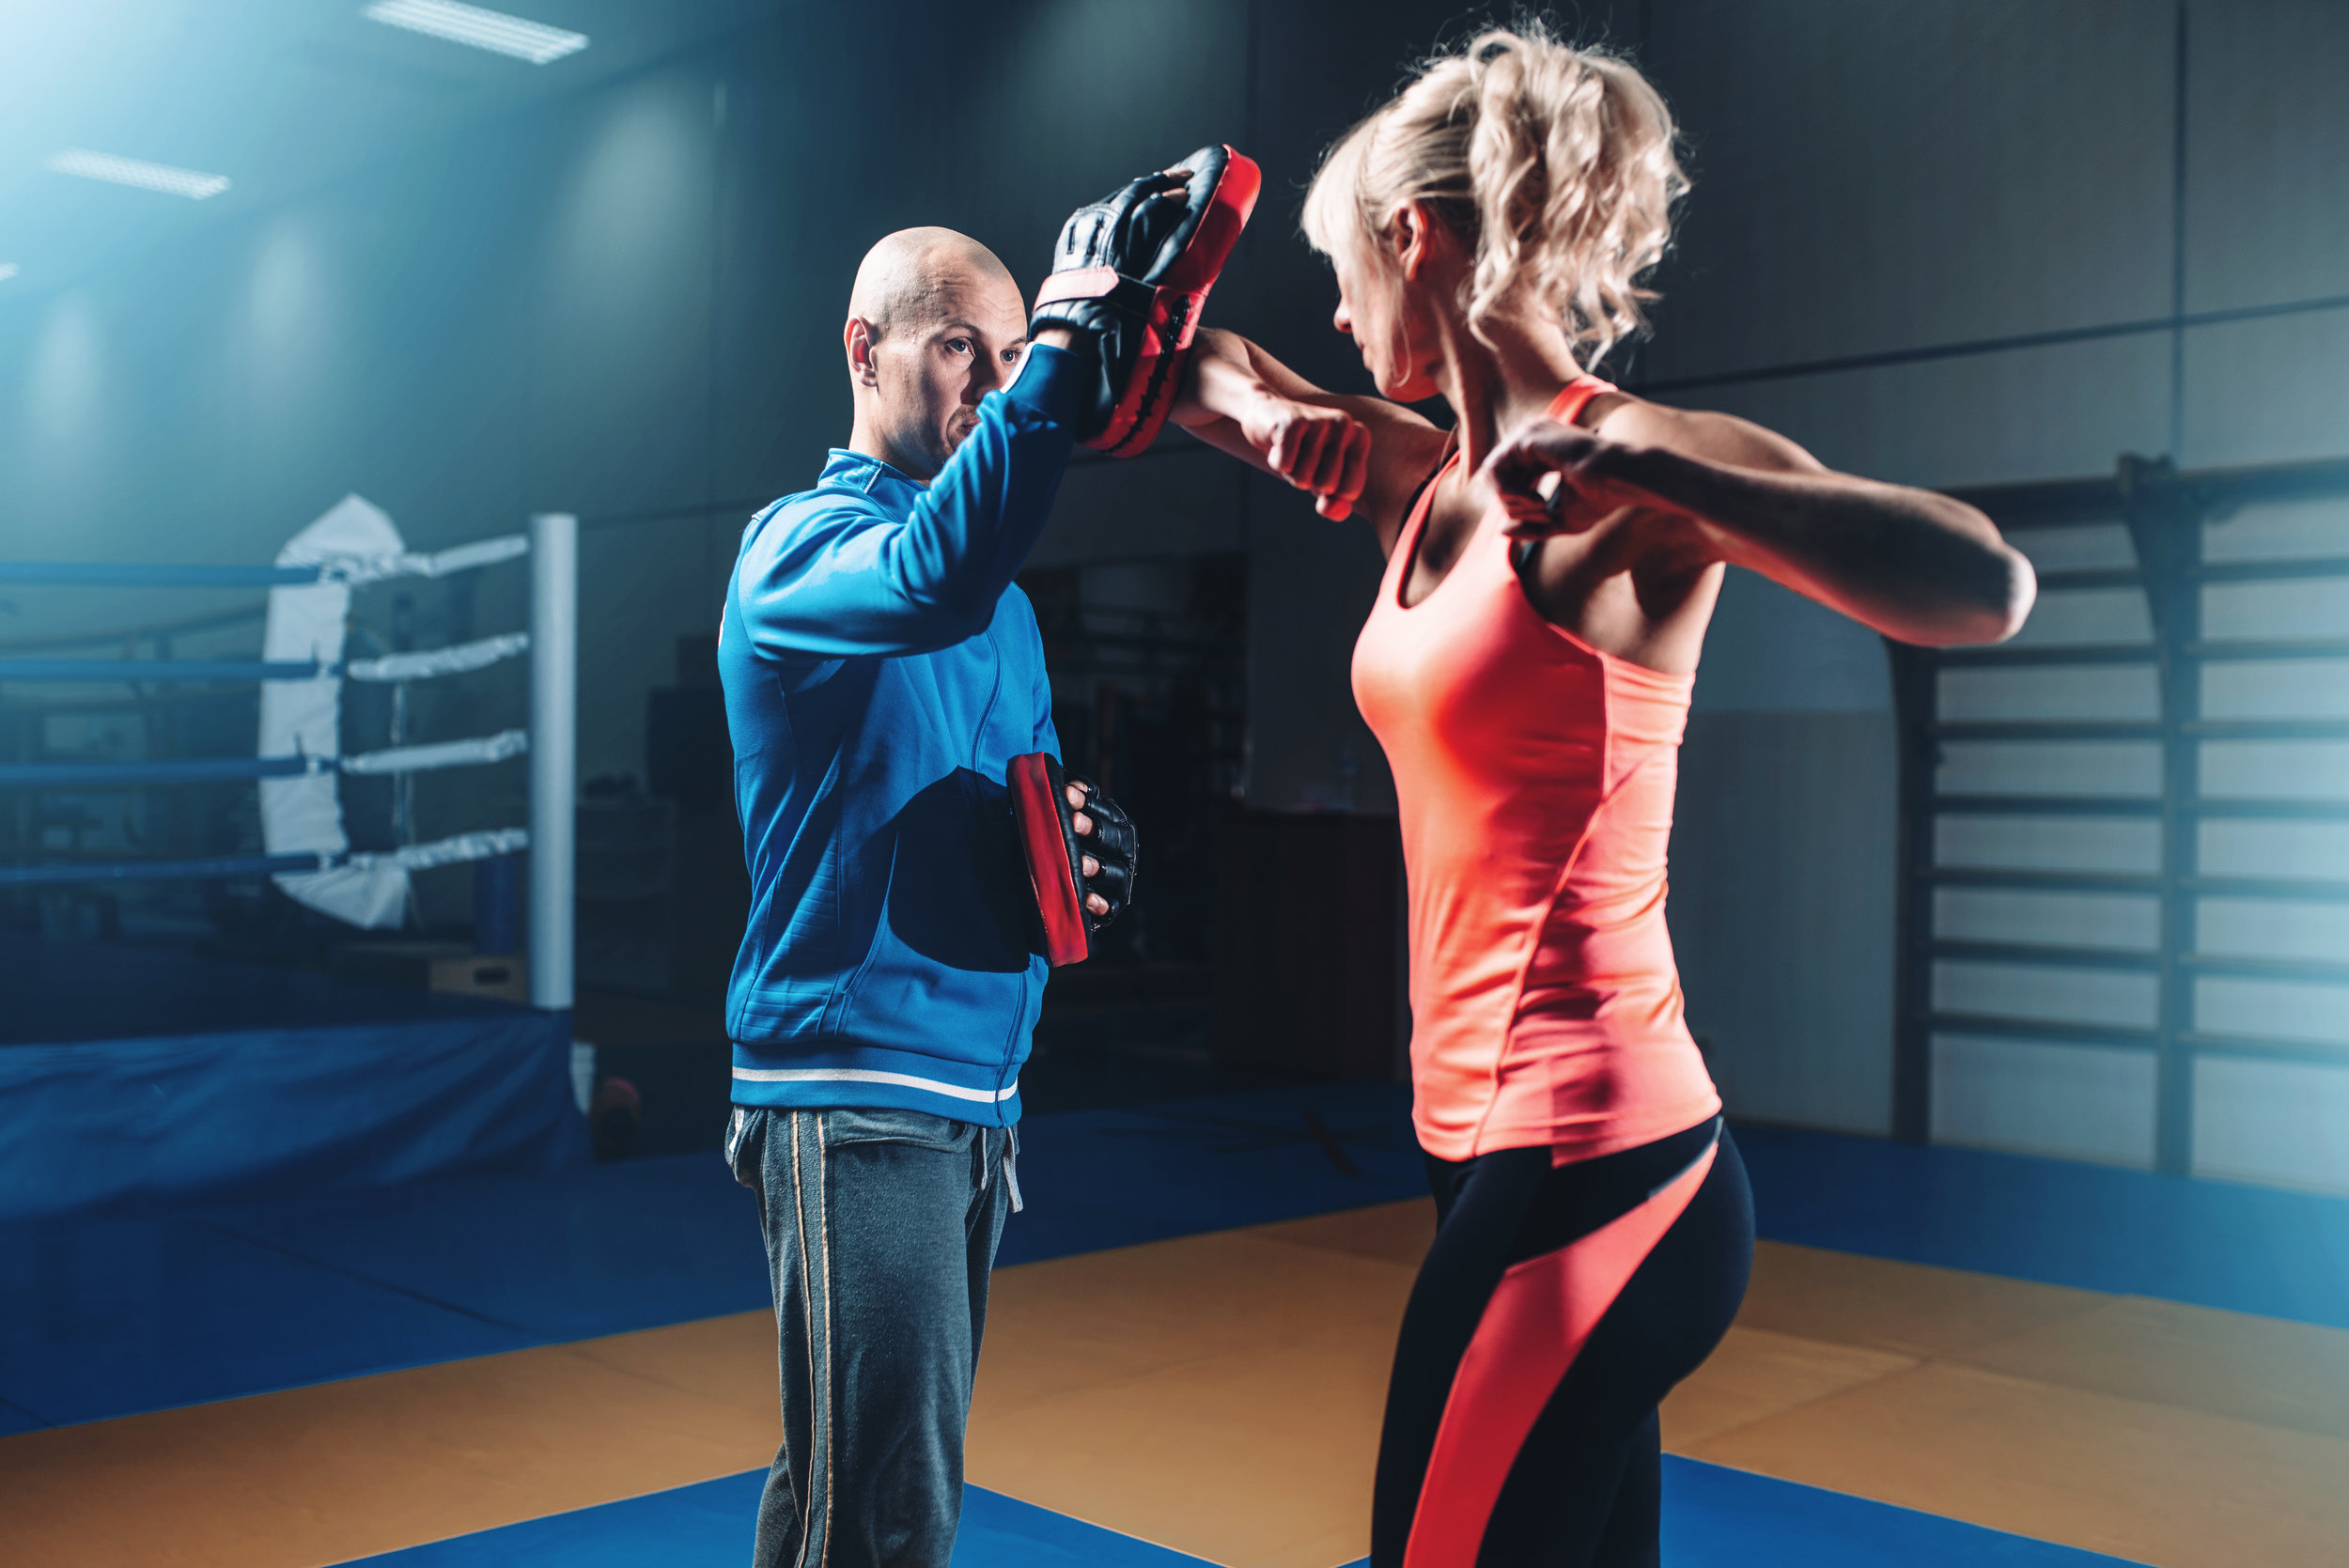 woman-on-self-defense-training-with-male-trainer-PUPN73L.jpg